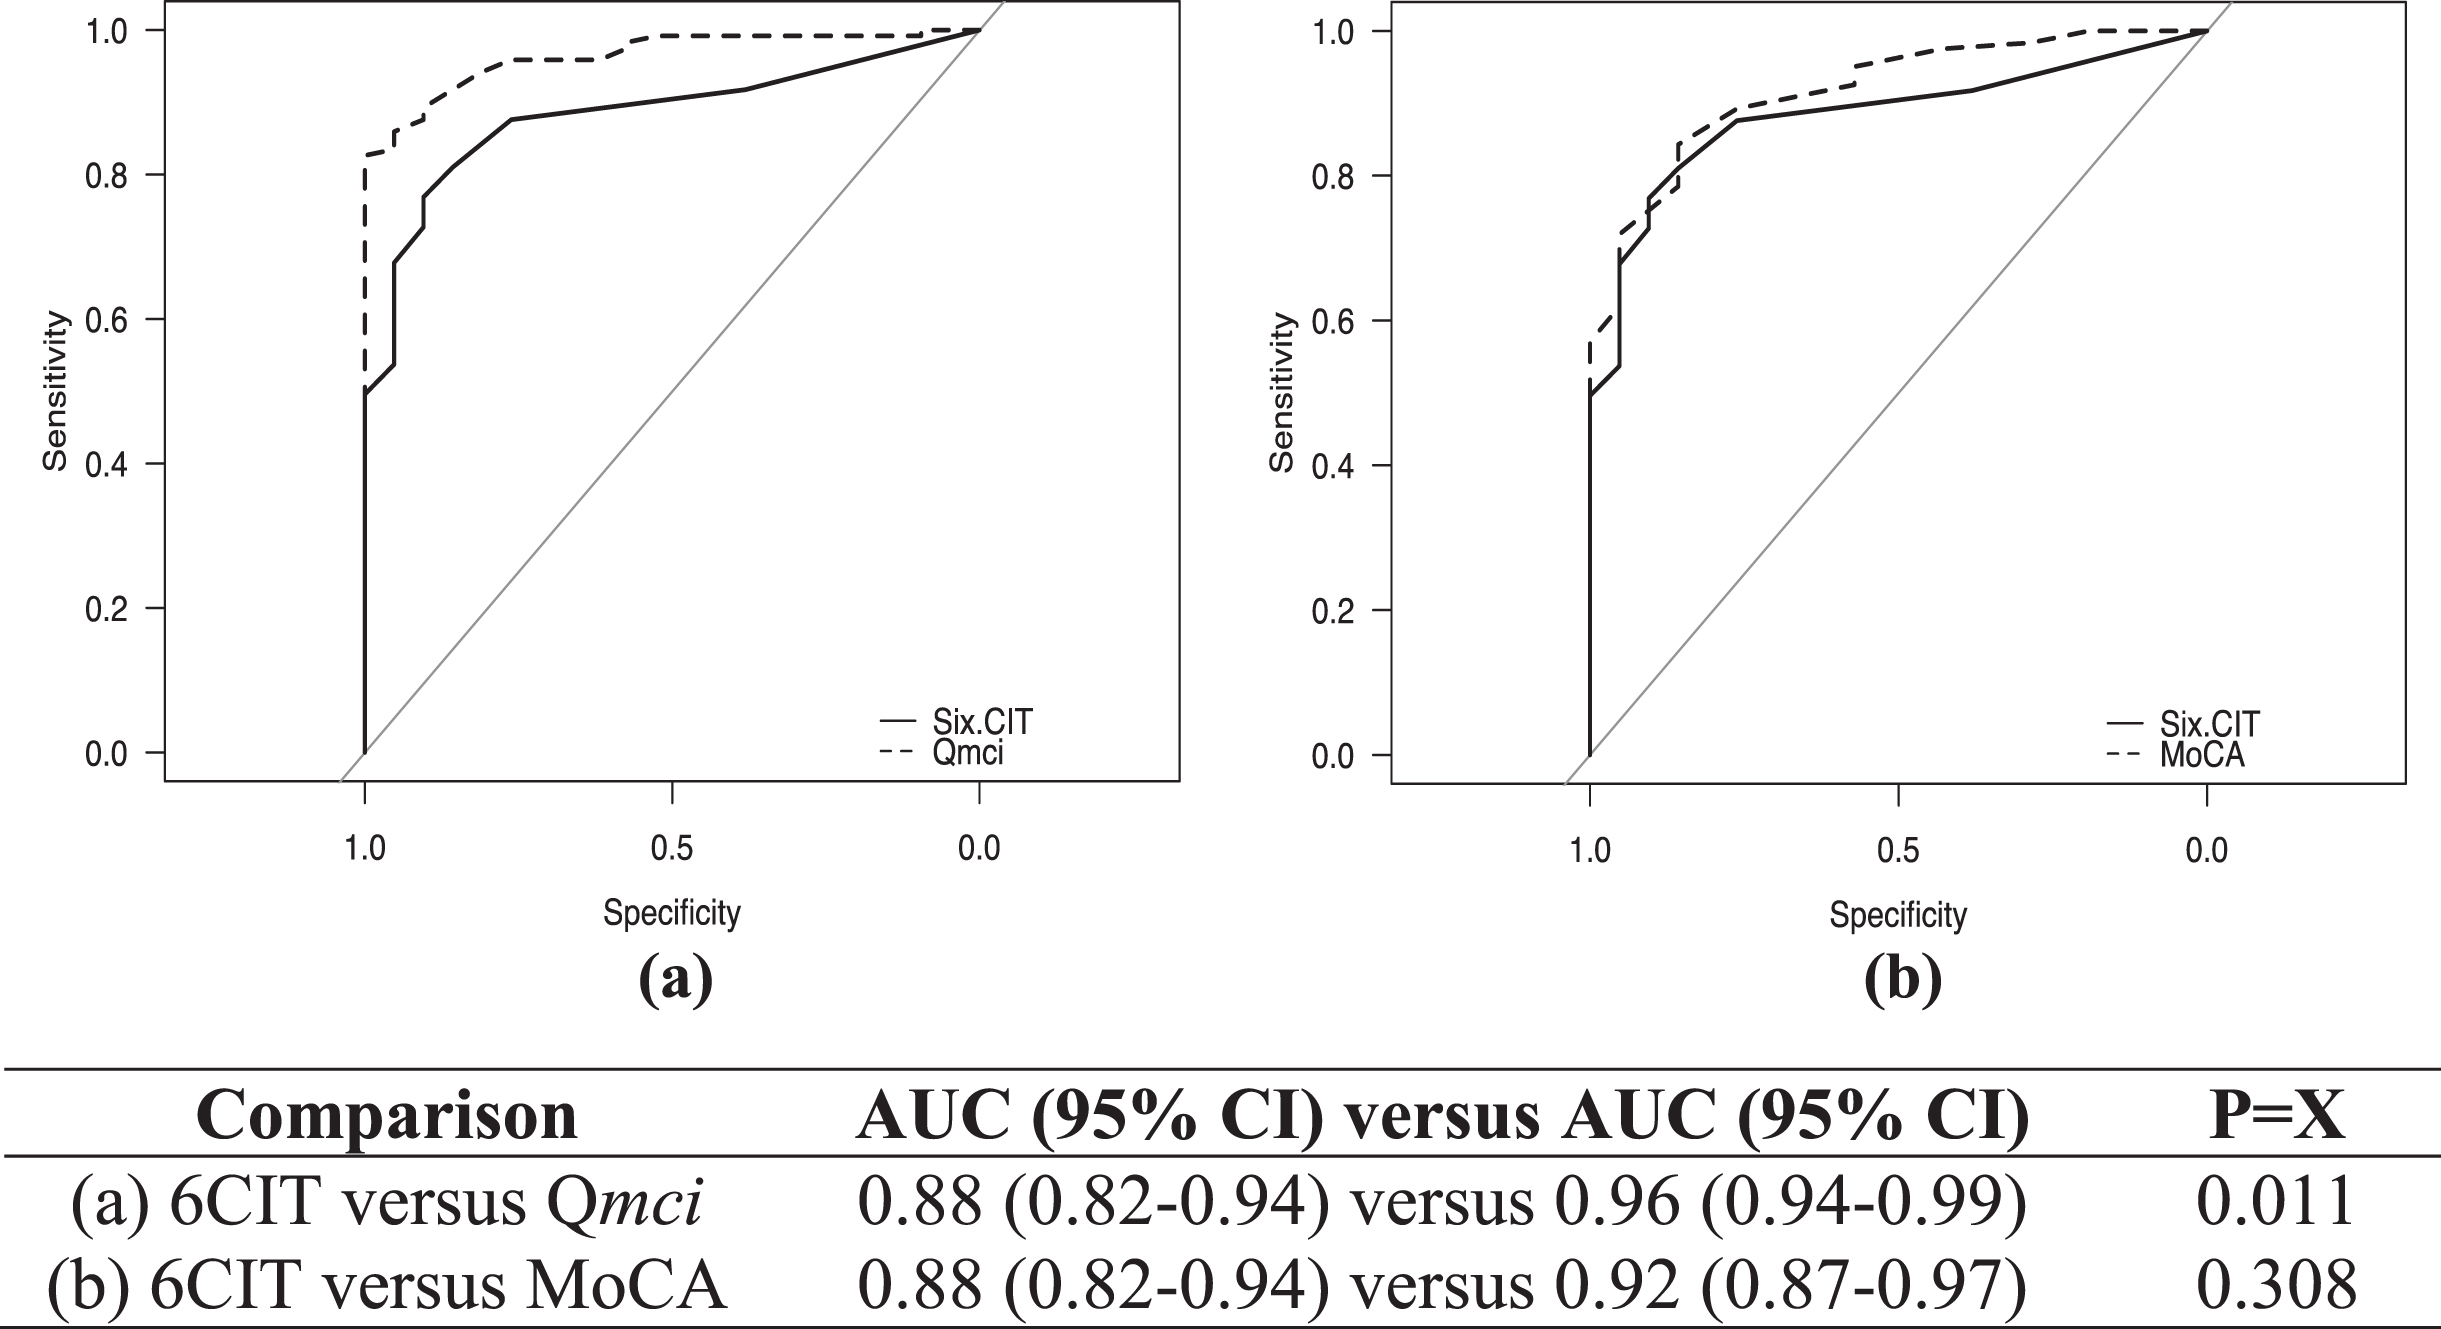 Receiver operating characteristic curves with area under the curve (AUC) scores with 95% confidence intervals (CI), showing the accuracy of the Six-Item Cognitive Impairment Test (6CIT) compared with the (a) Quick Mild Cognitive Impairment (Qmci) screen and (b) Montreal Cognitive Assessment (MoCA) in their ability to identify cognitive impairment (MCI or dementia).